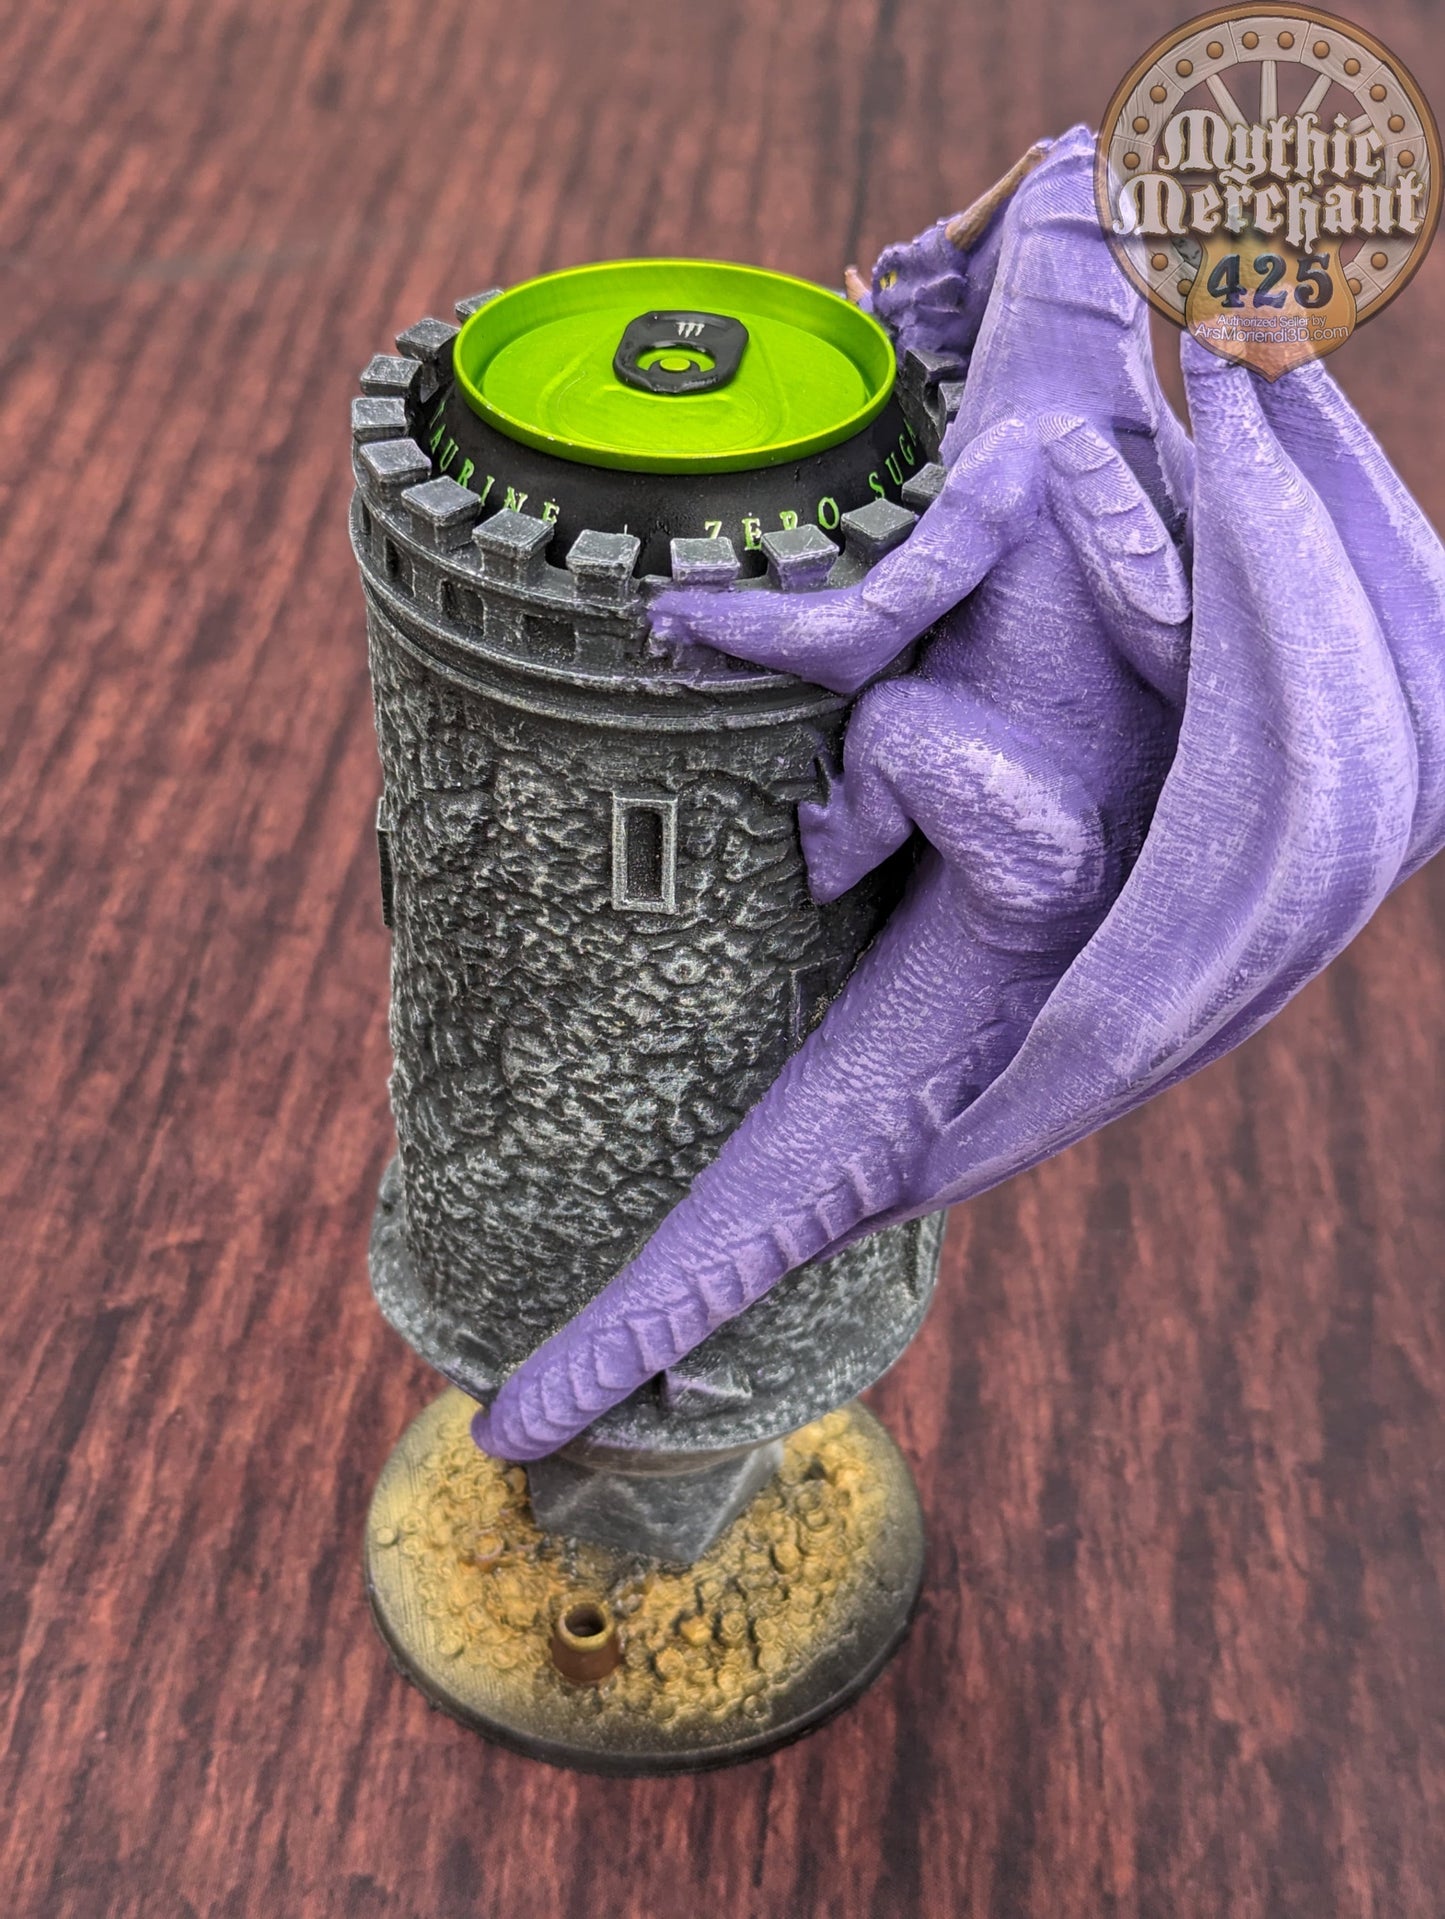 Dungeon-Game Master 3D Printed Mythic Mug Stein | Tabletop RPG Gaming Cosplay - Dungeons and Dragon DnD D&D Wargaming | Koozie Can Holder